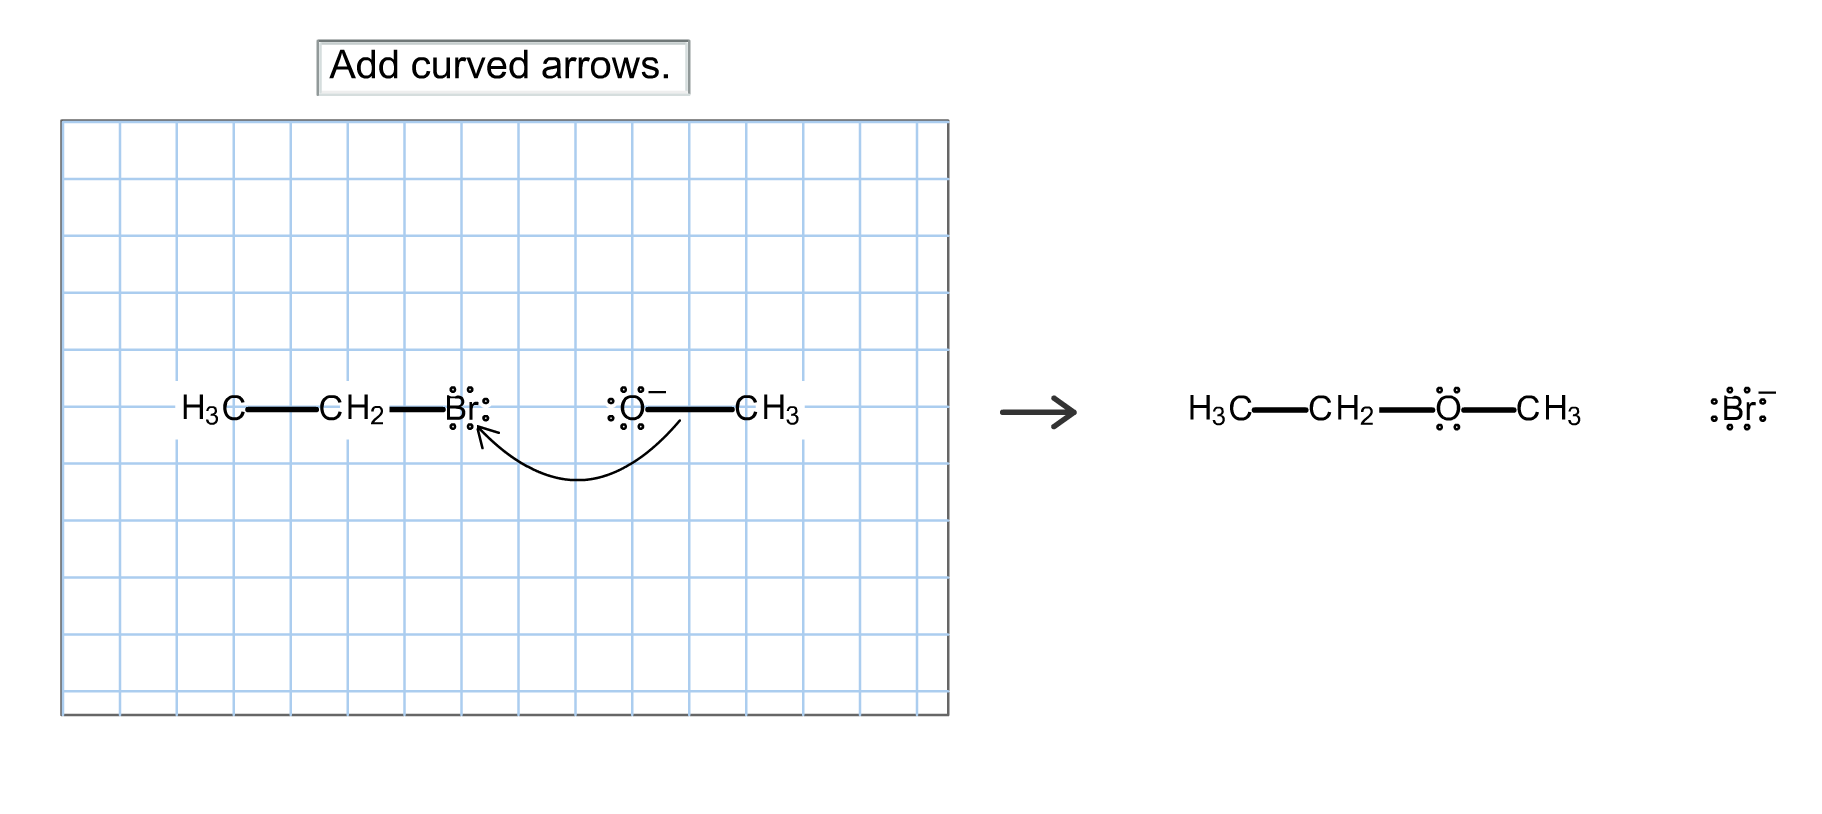 Given the following singlestep reaction, draw the curvedarrow